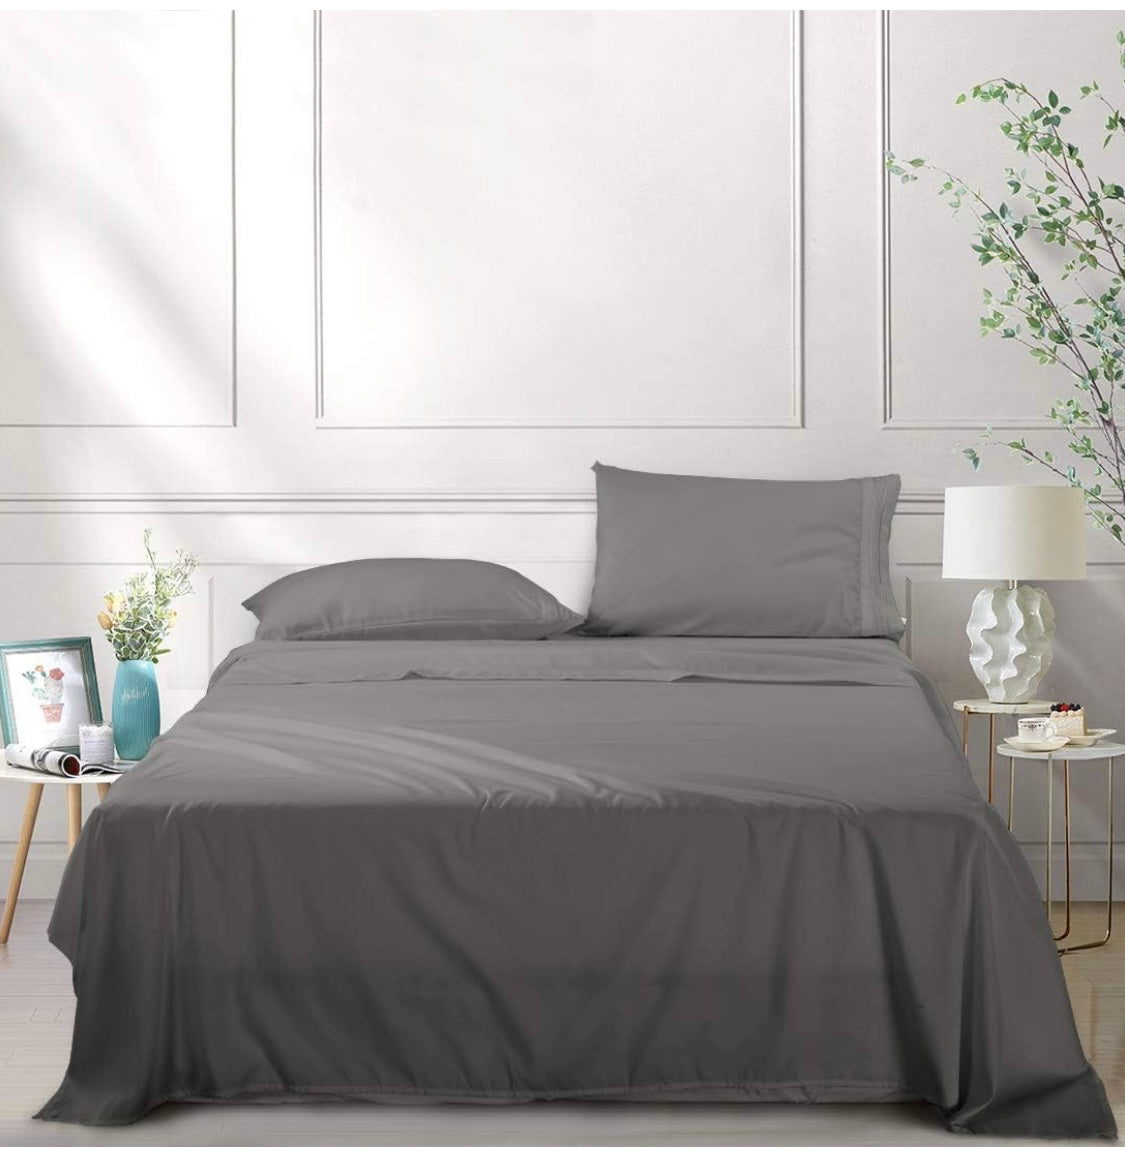 Edilly Queen Bed Sheet Set 4 Piece Hotel Luxury Sheets – J&T Home